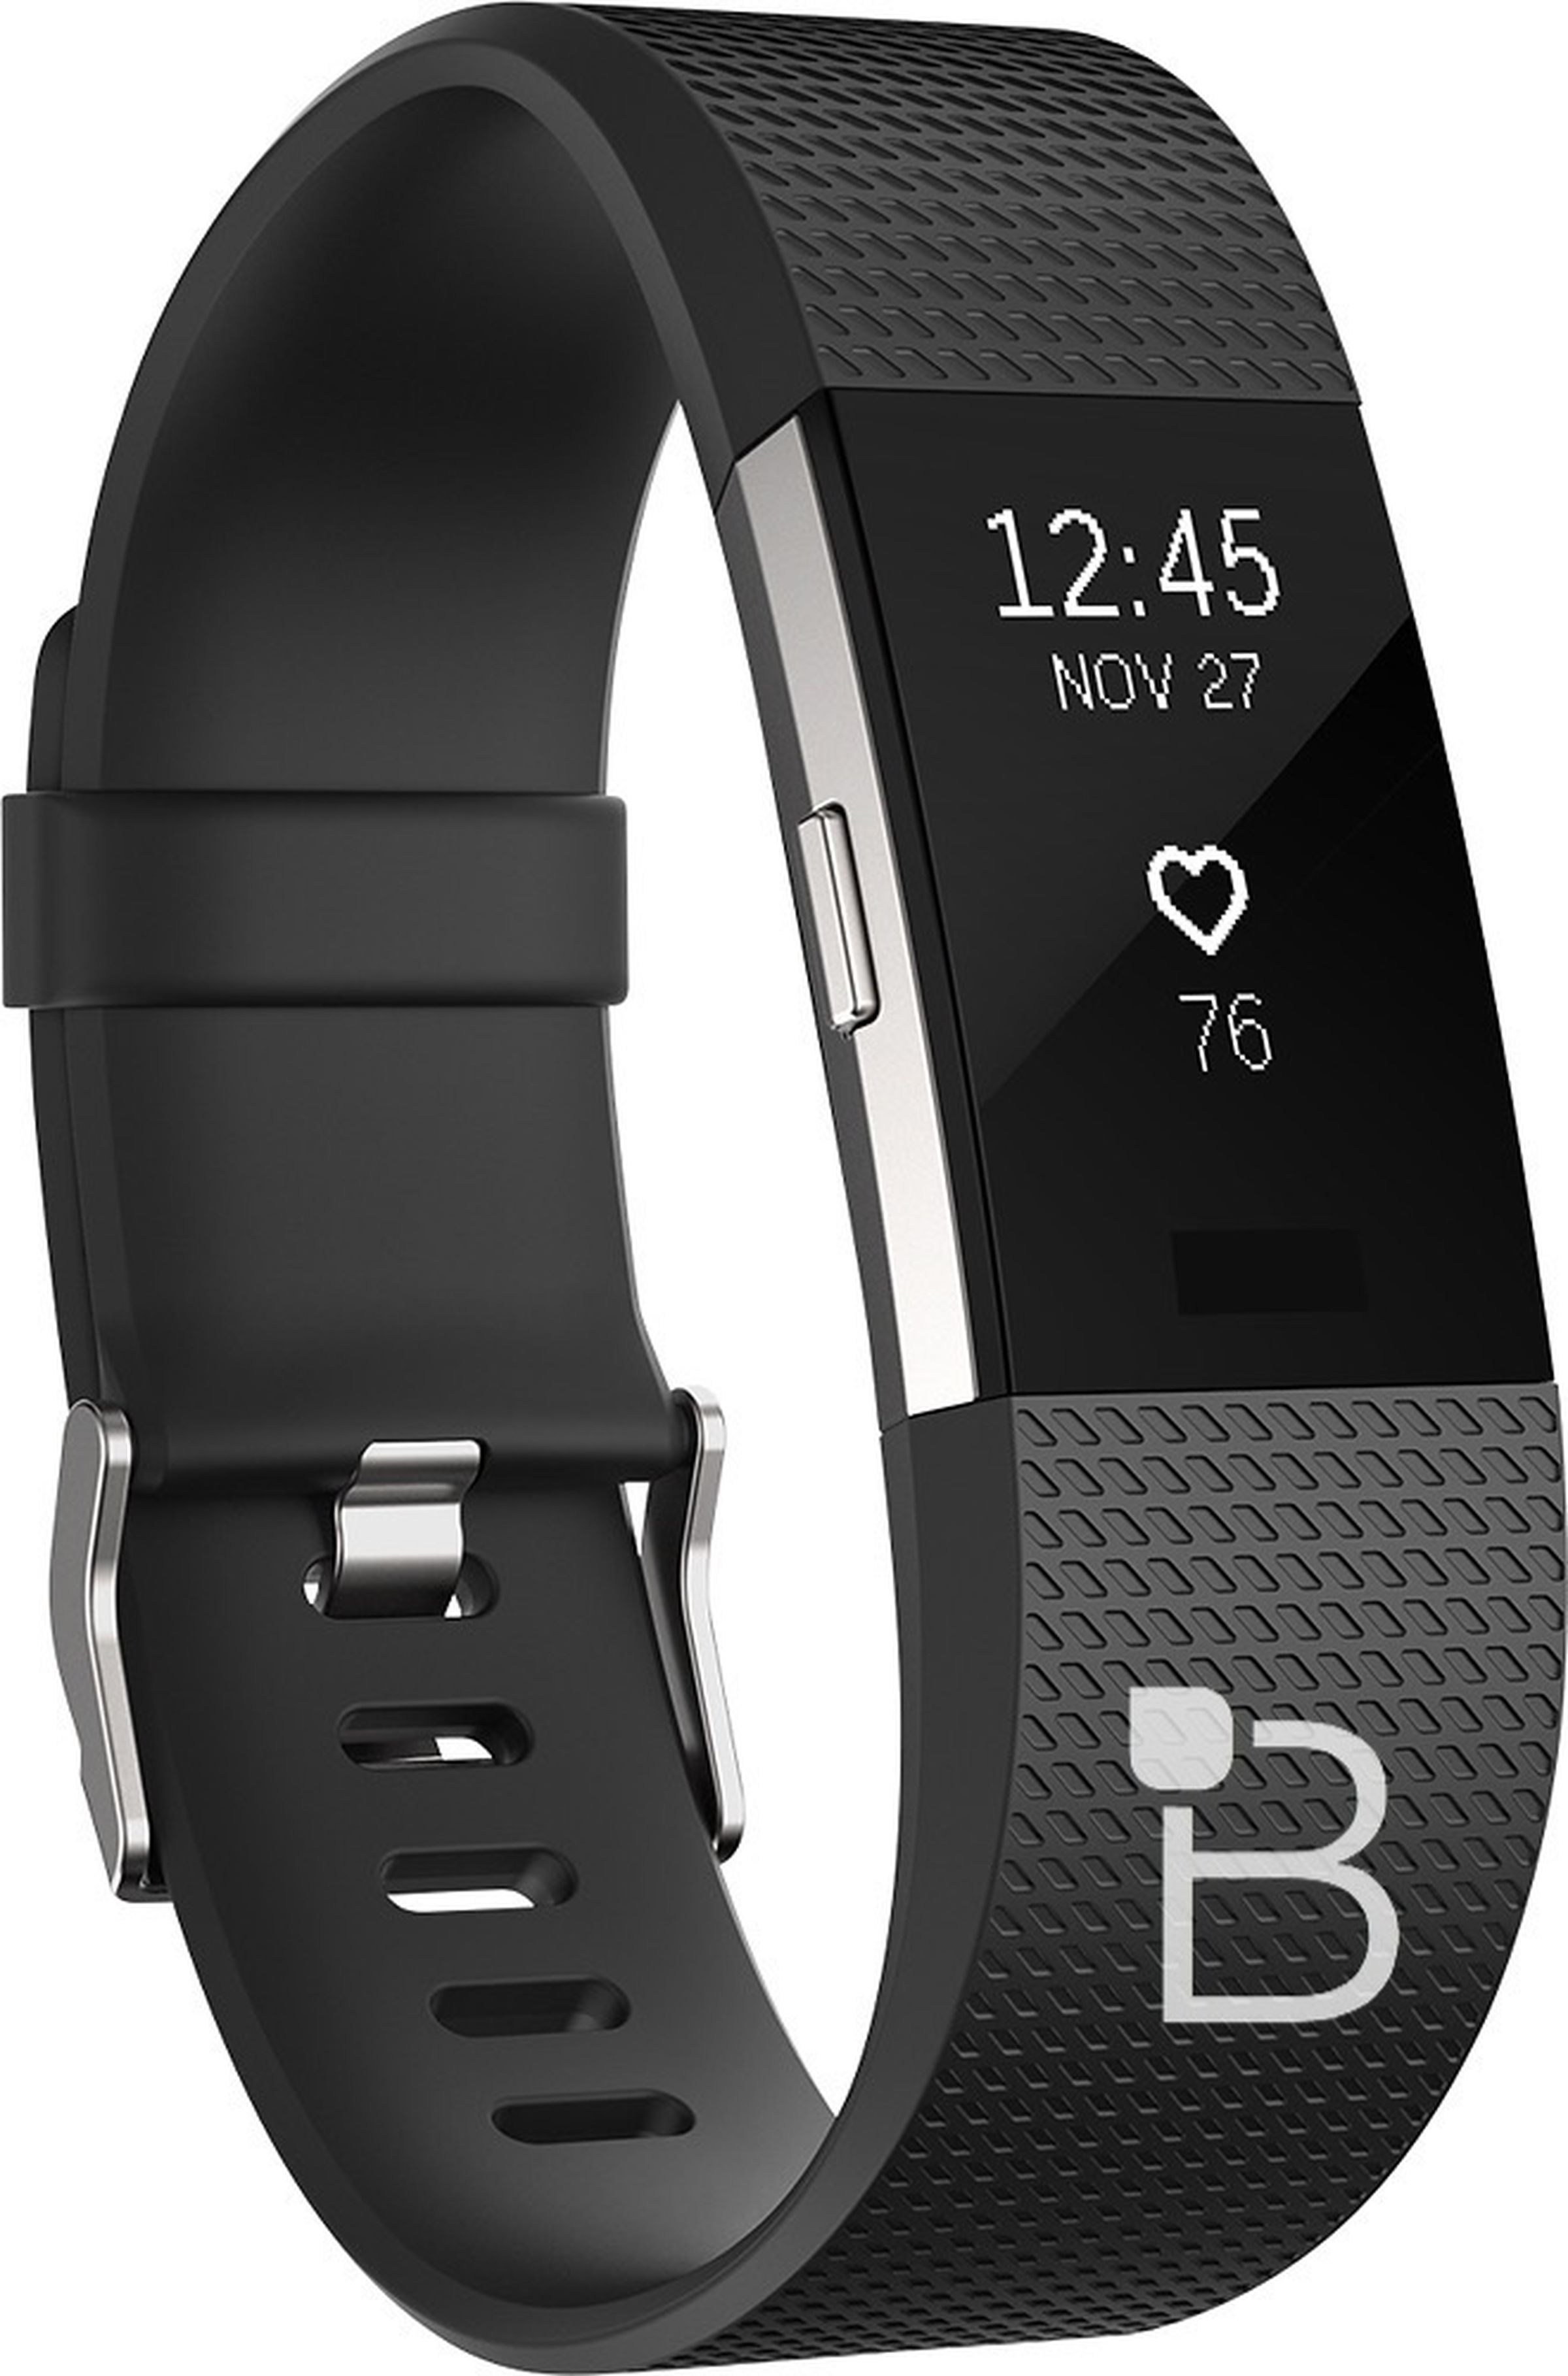 These might be new Fitbit products